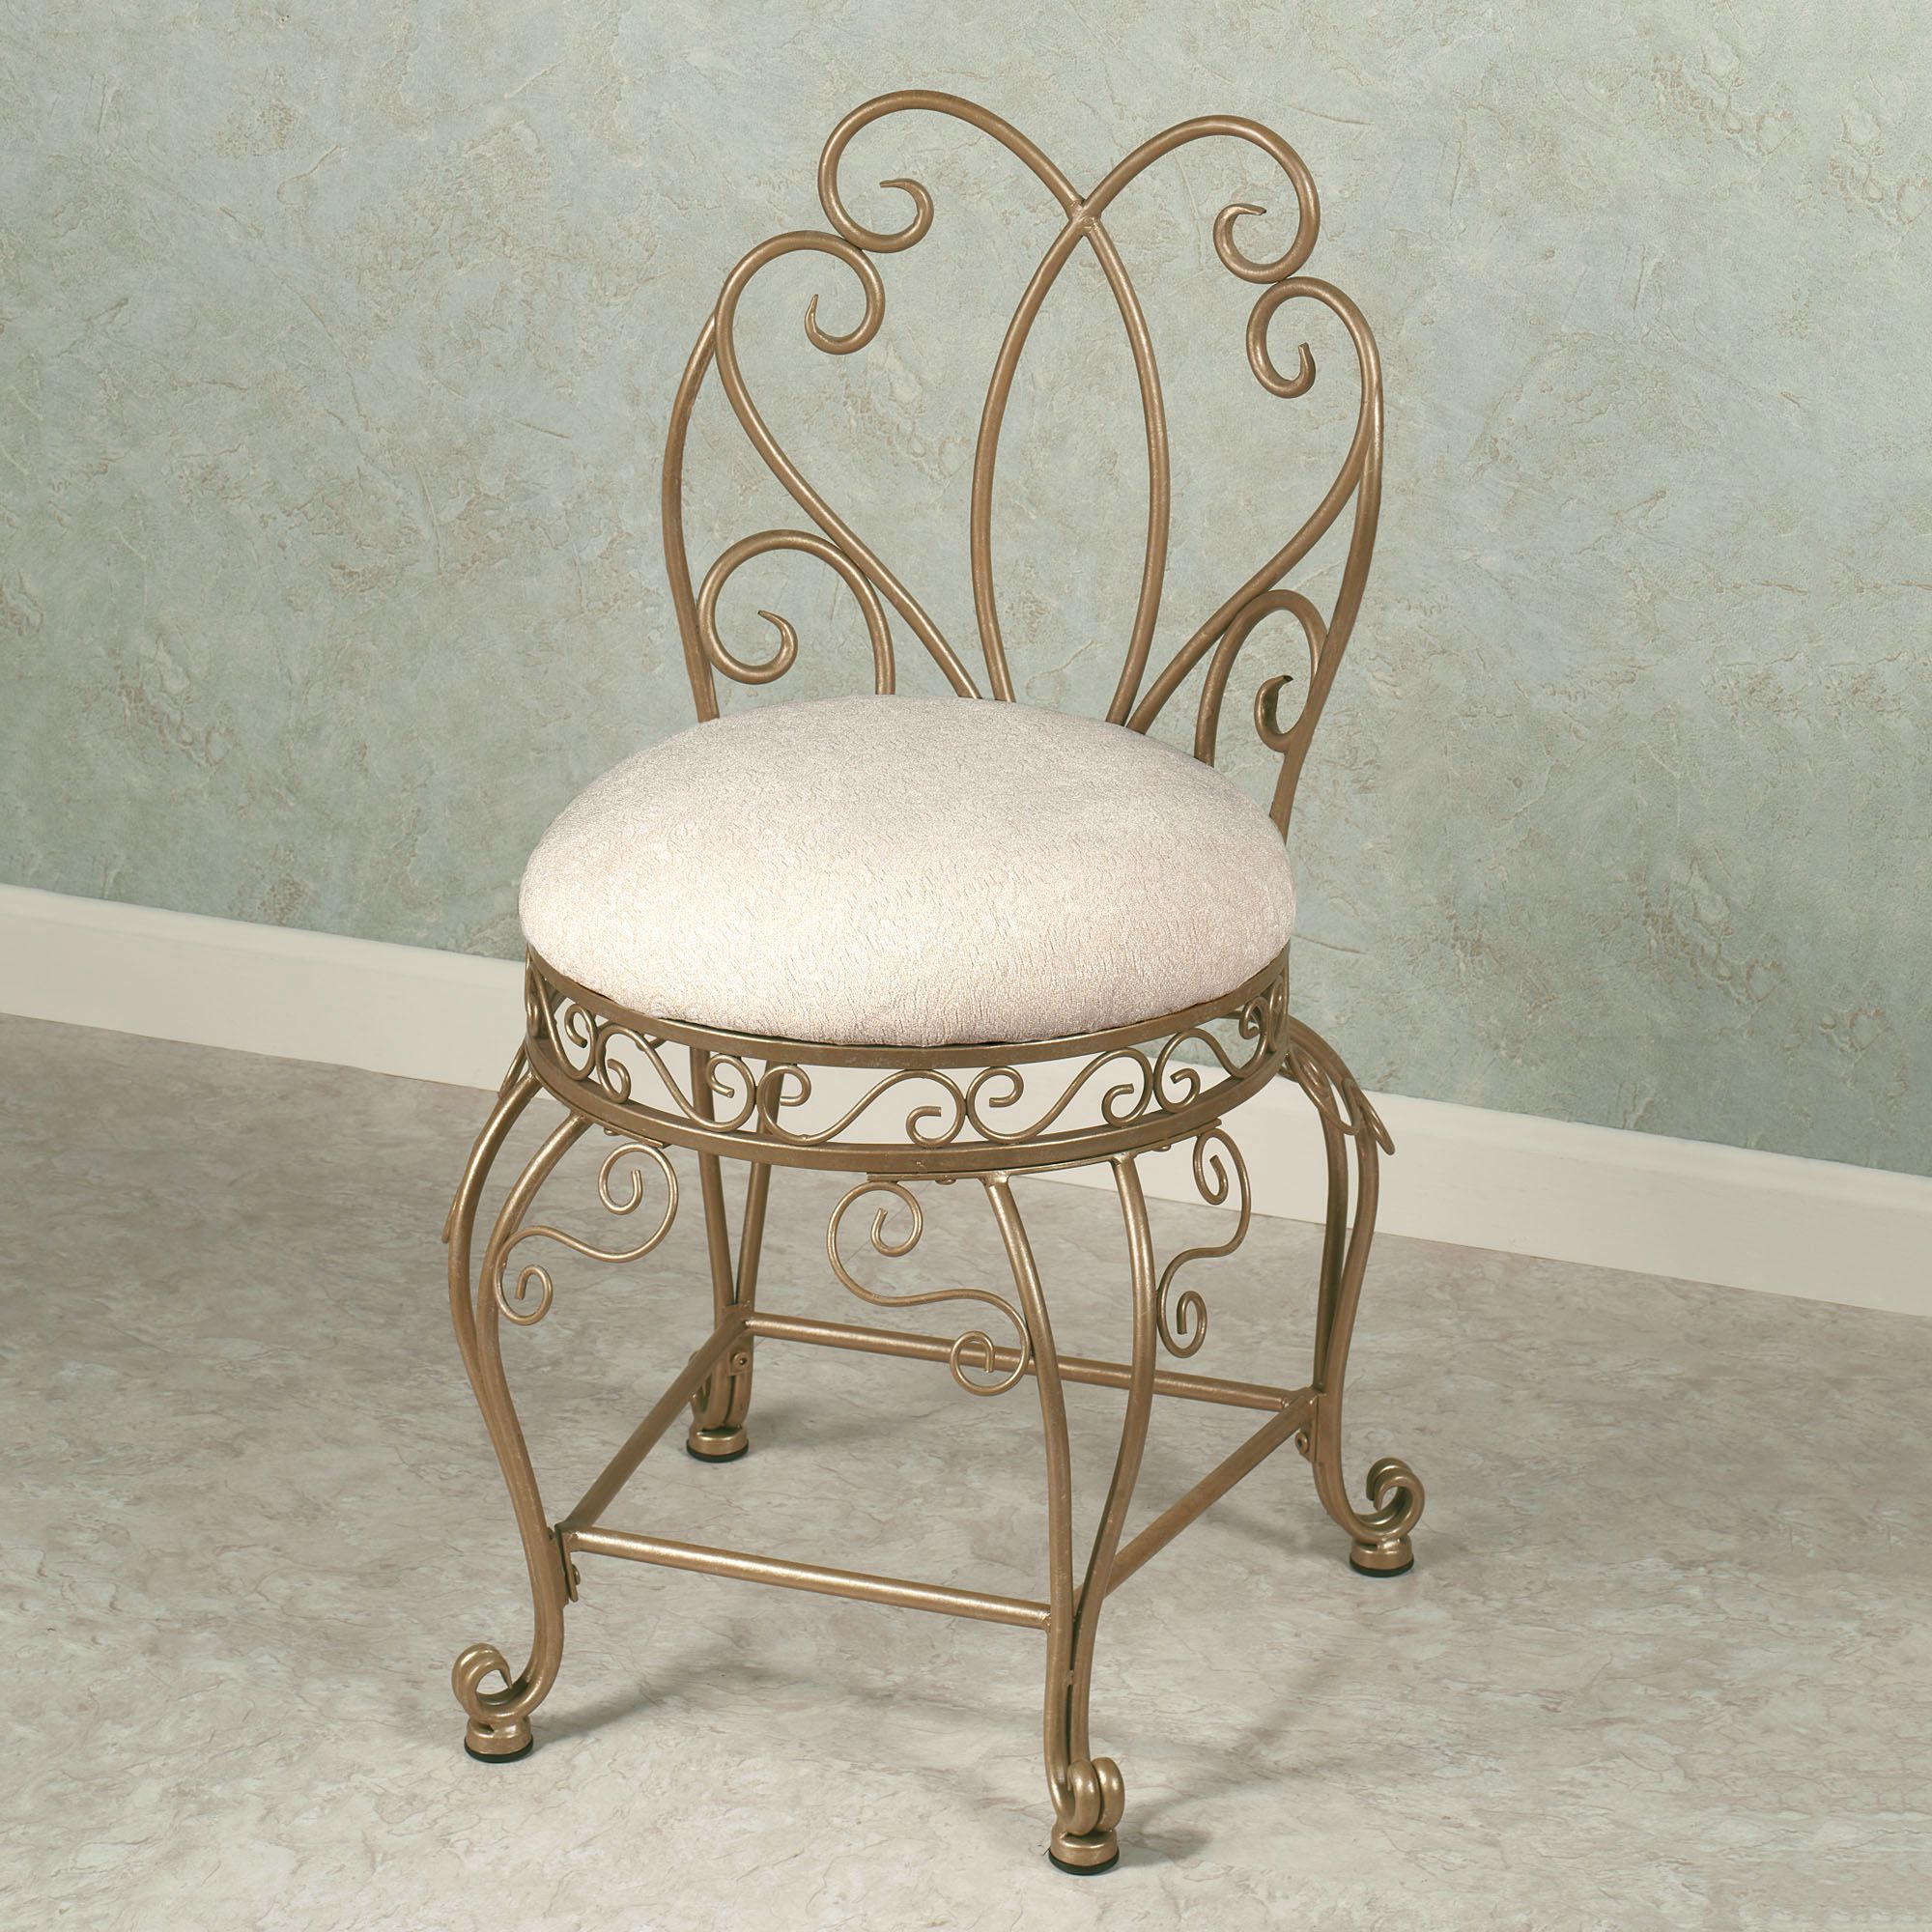 Gianna Vanity Chair Pertaining To Most Recently Released Cream And Gold Hardwood Vanity Seats (View 9 of 10)